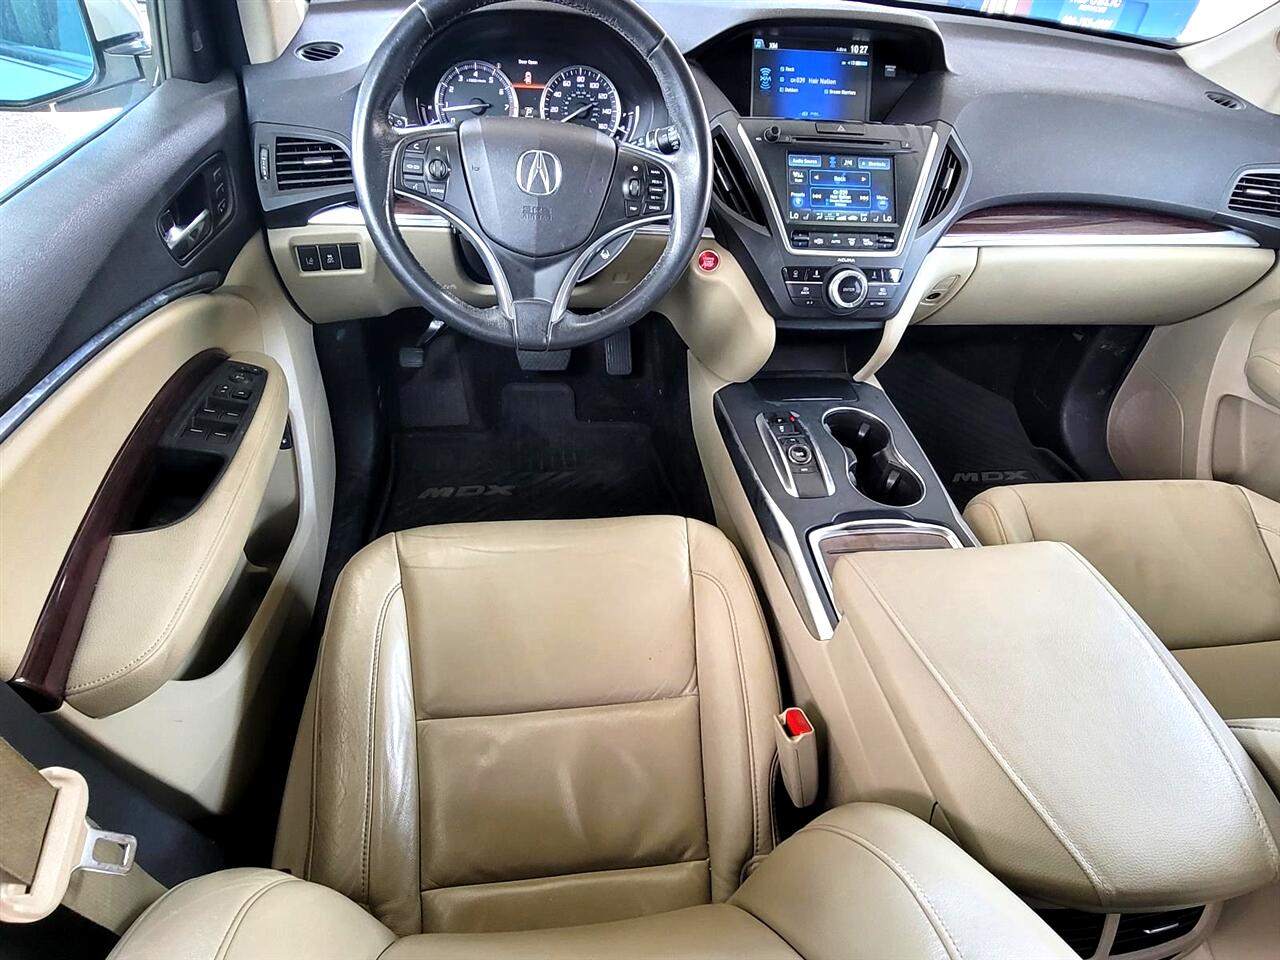 Acura Certified - 2016 Acura MDX Specs and Details - Certified Pre-Owned